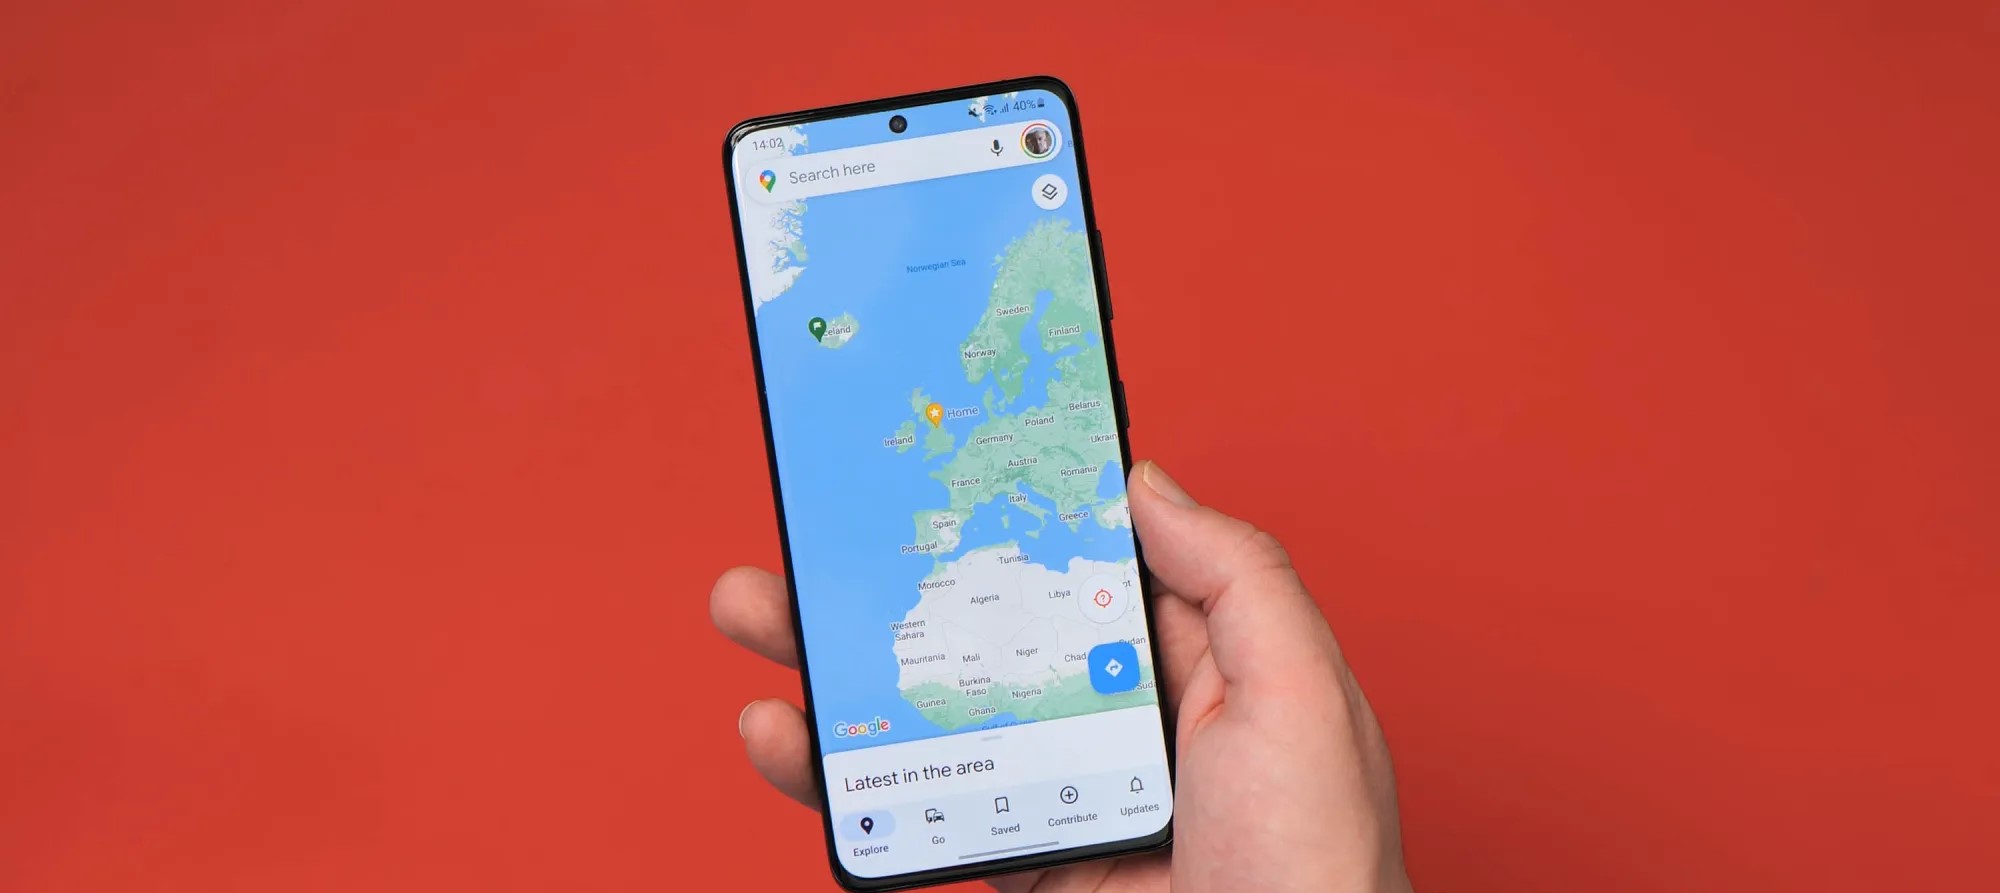 ❤ Google Maps on Android readies planned charging stops for EVs